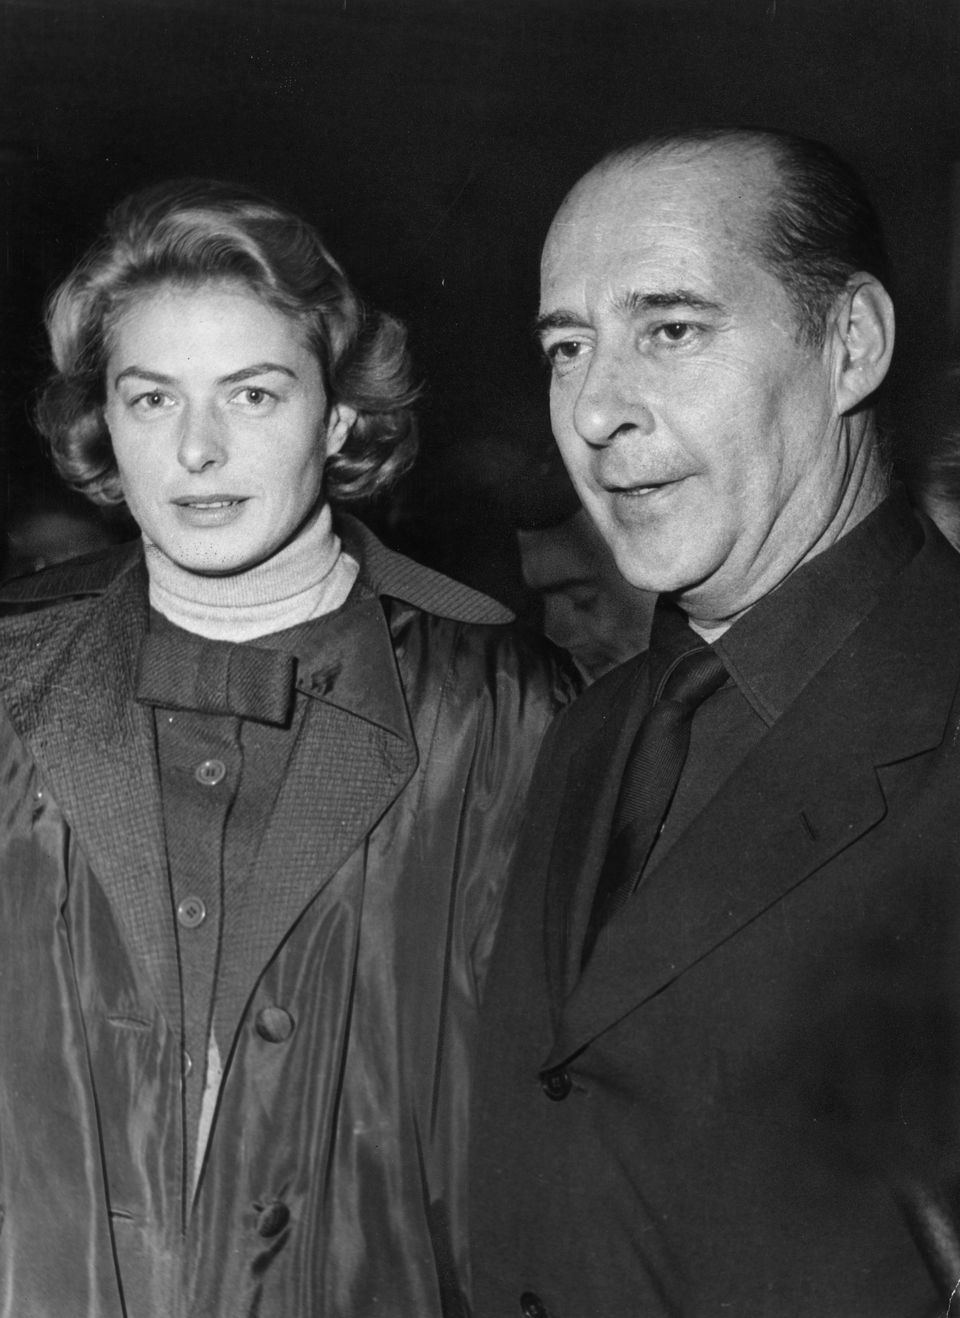 'Ingrid Bergman 'Thrown Out' Of The U.S. After Having Illegitimate Baby With Married Director'